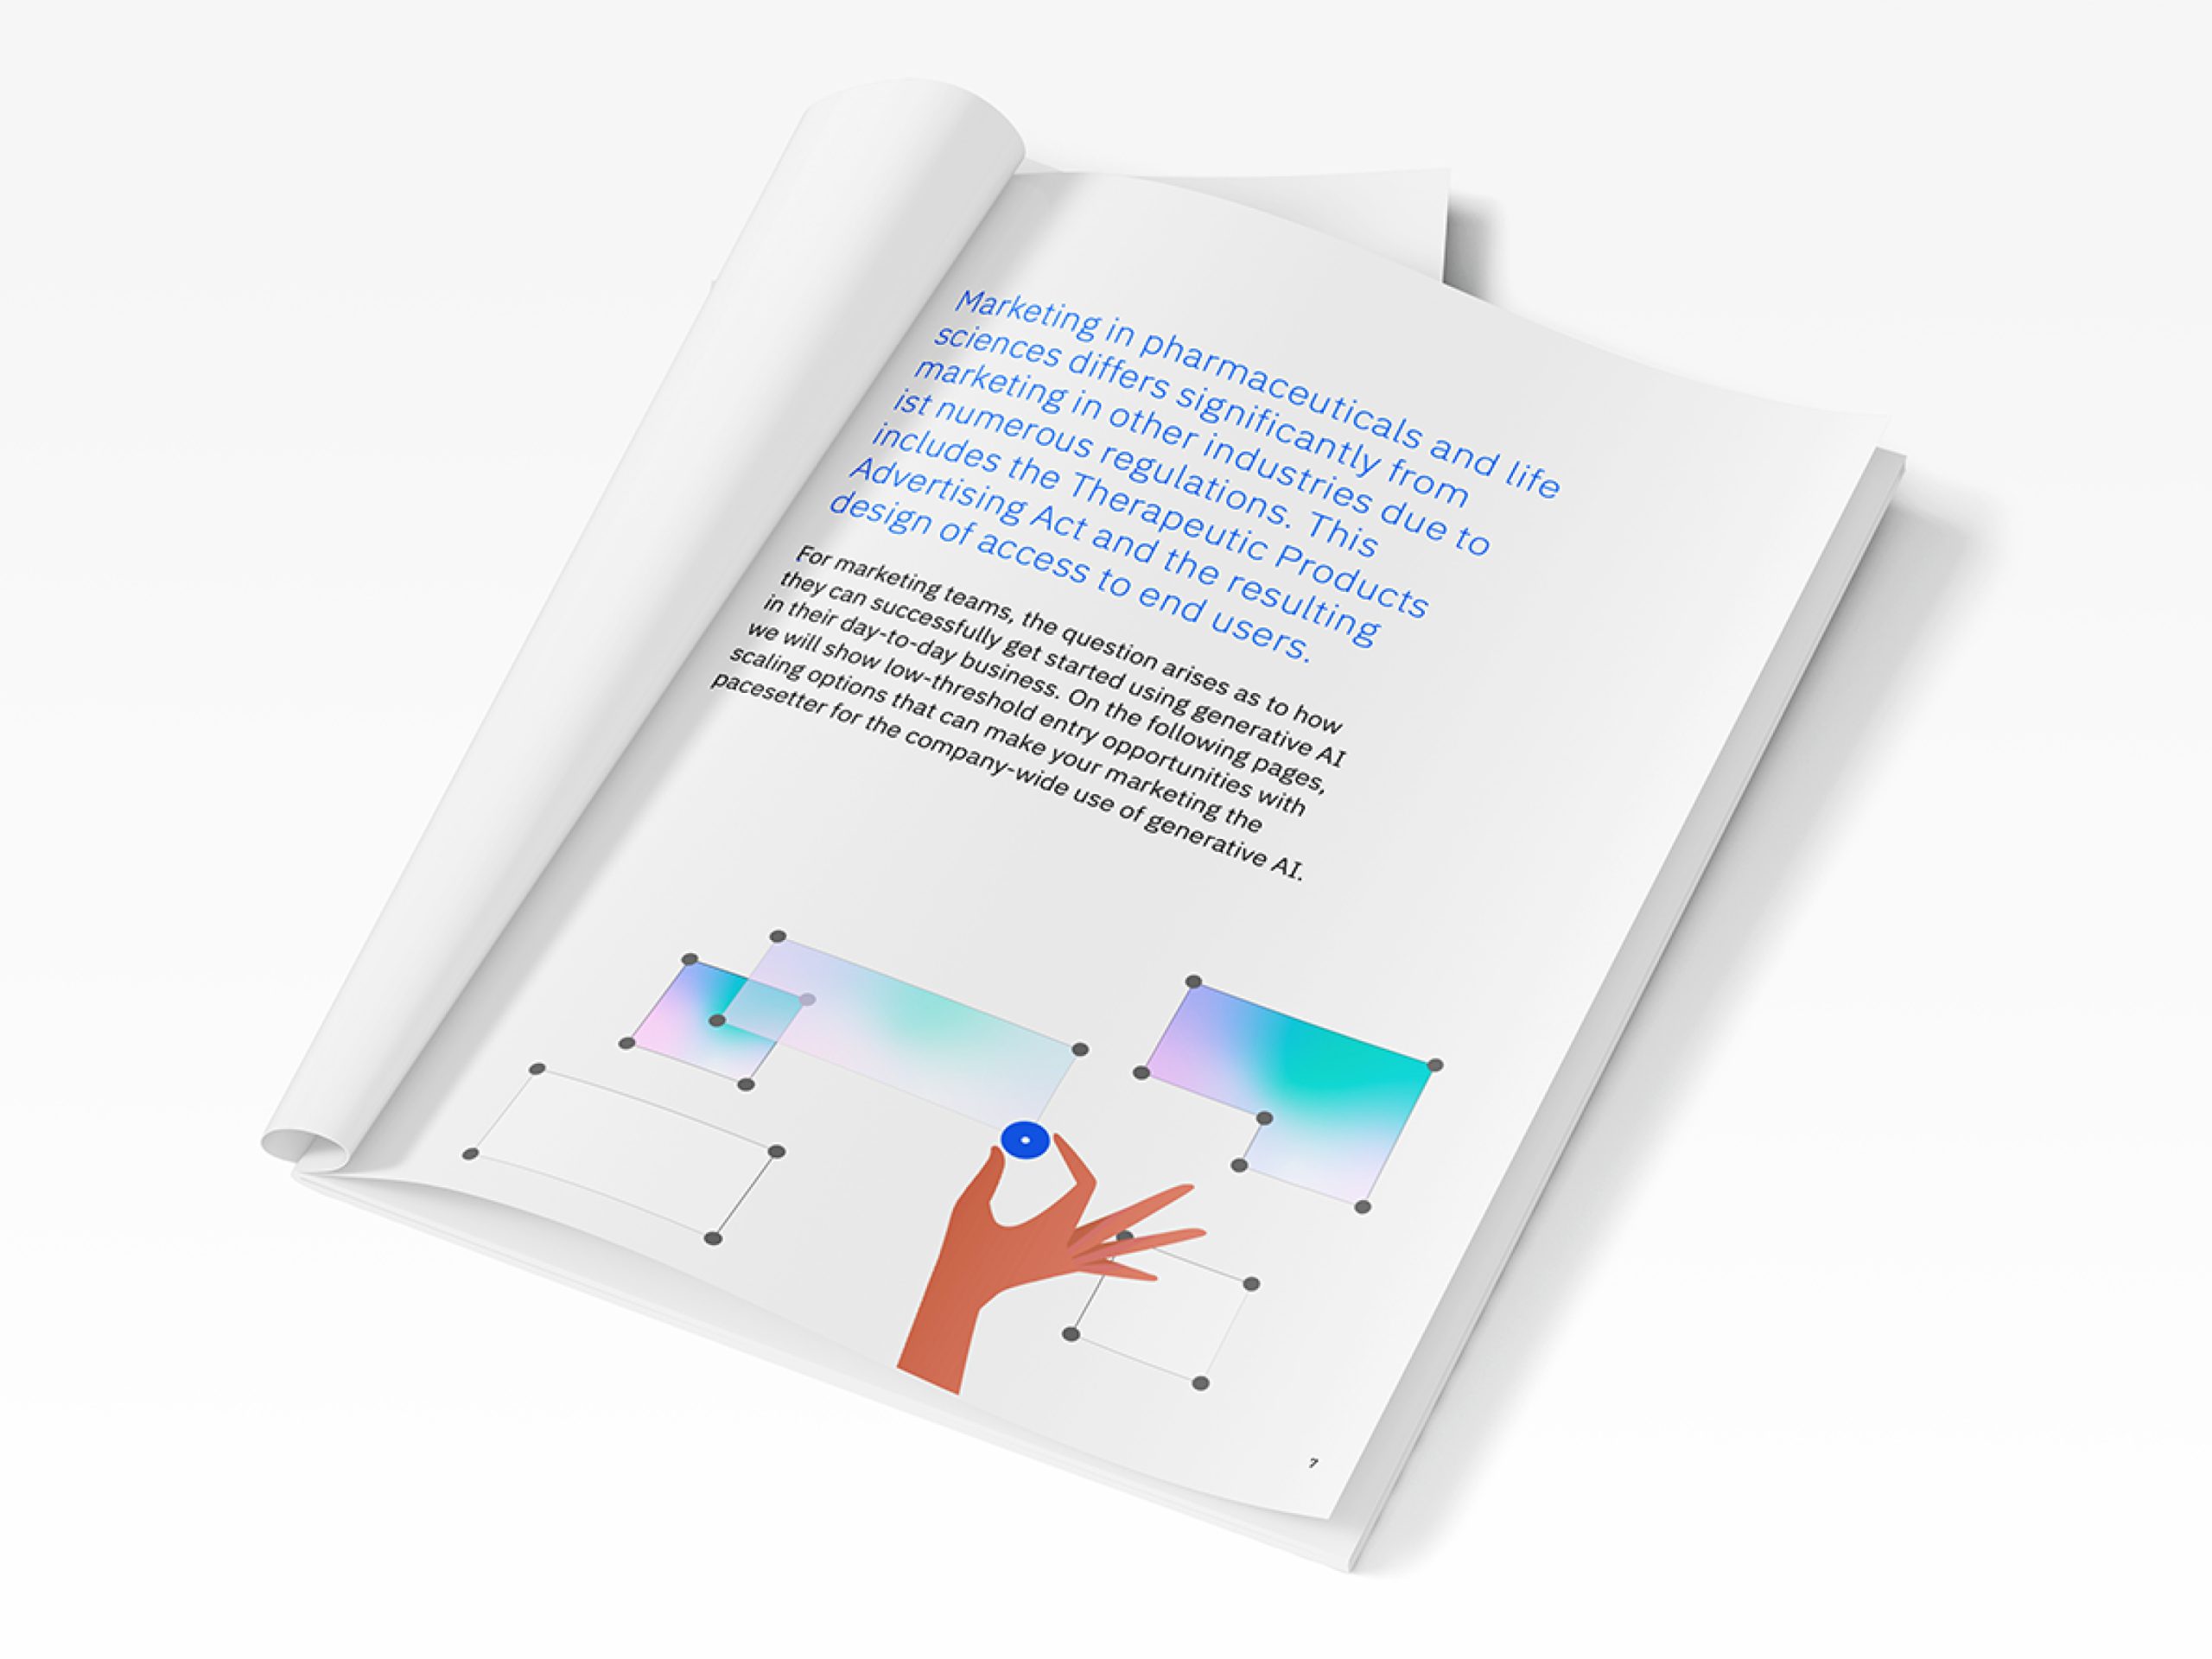 Mockup of whitepaper with text and illustration